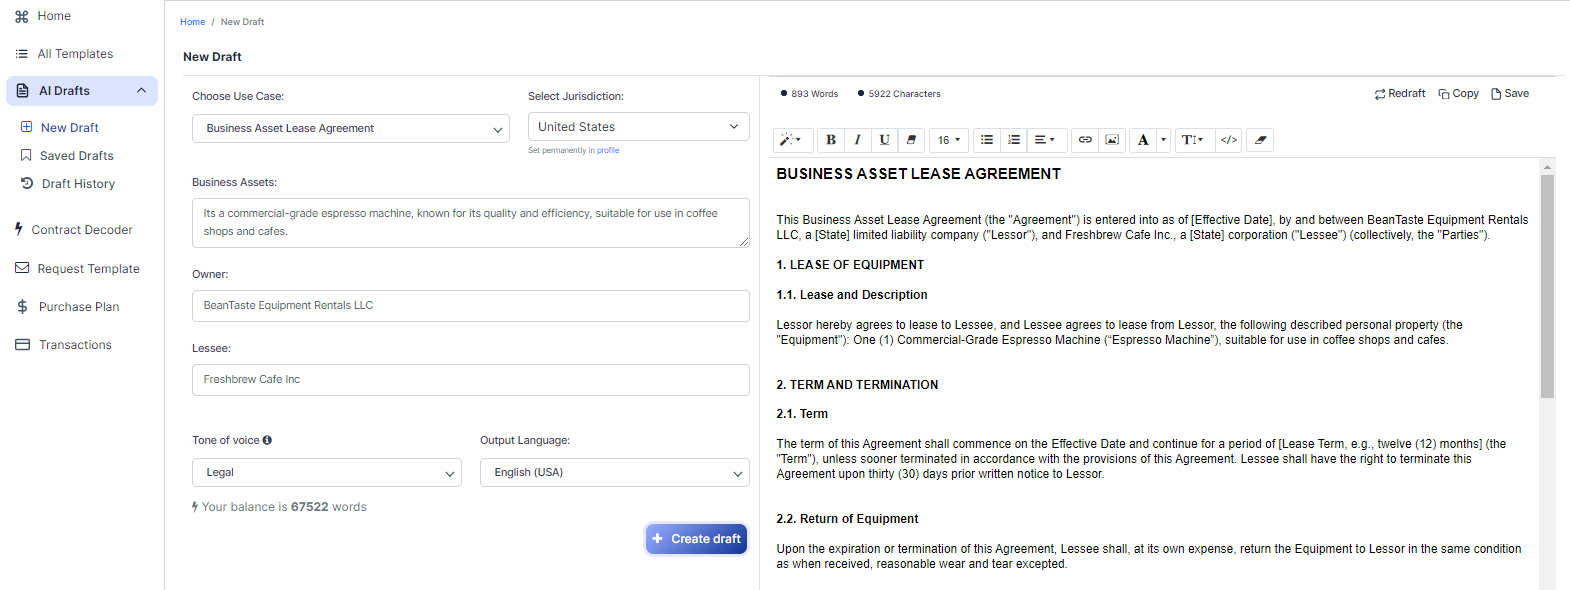 Business Asset Lease Agreement template